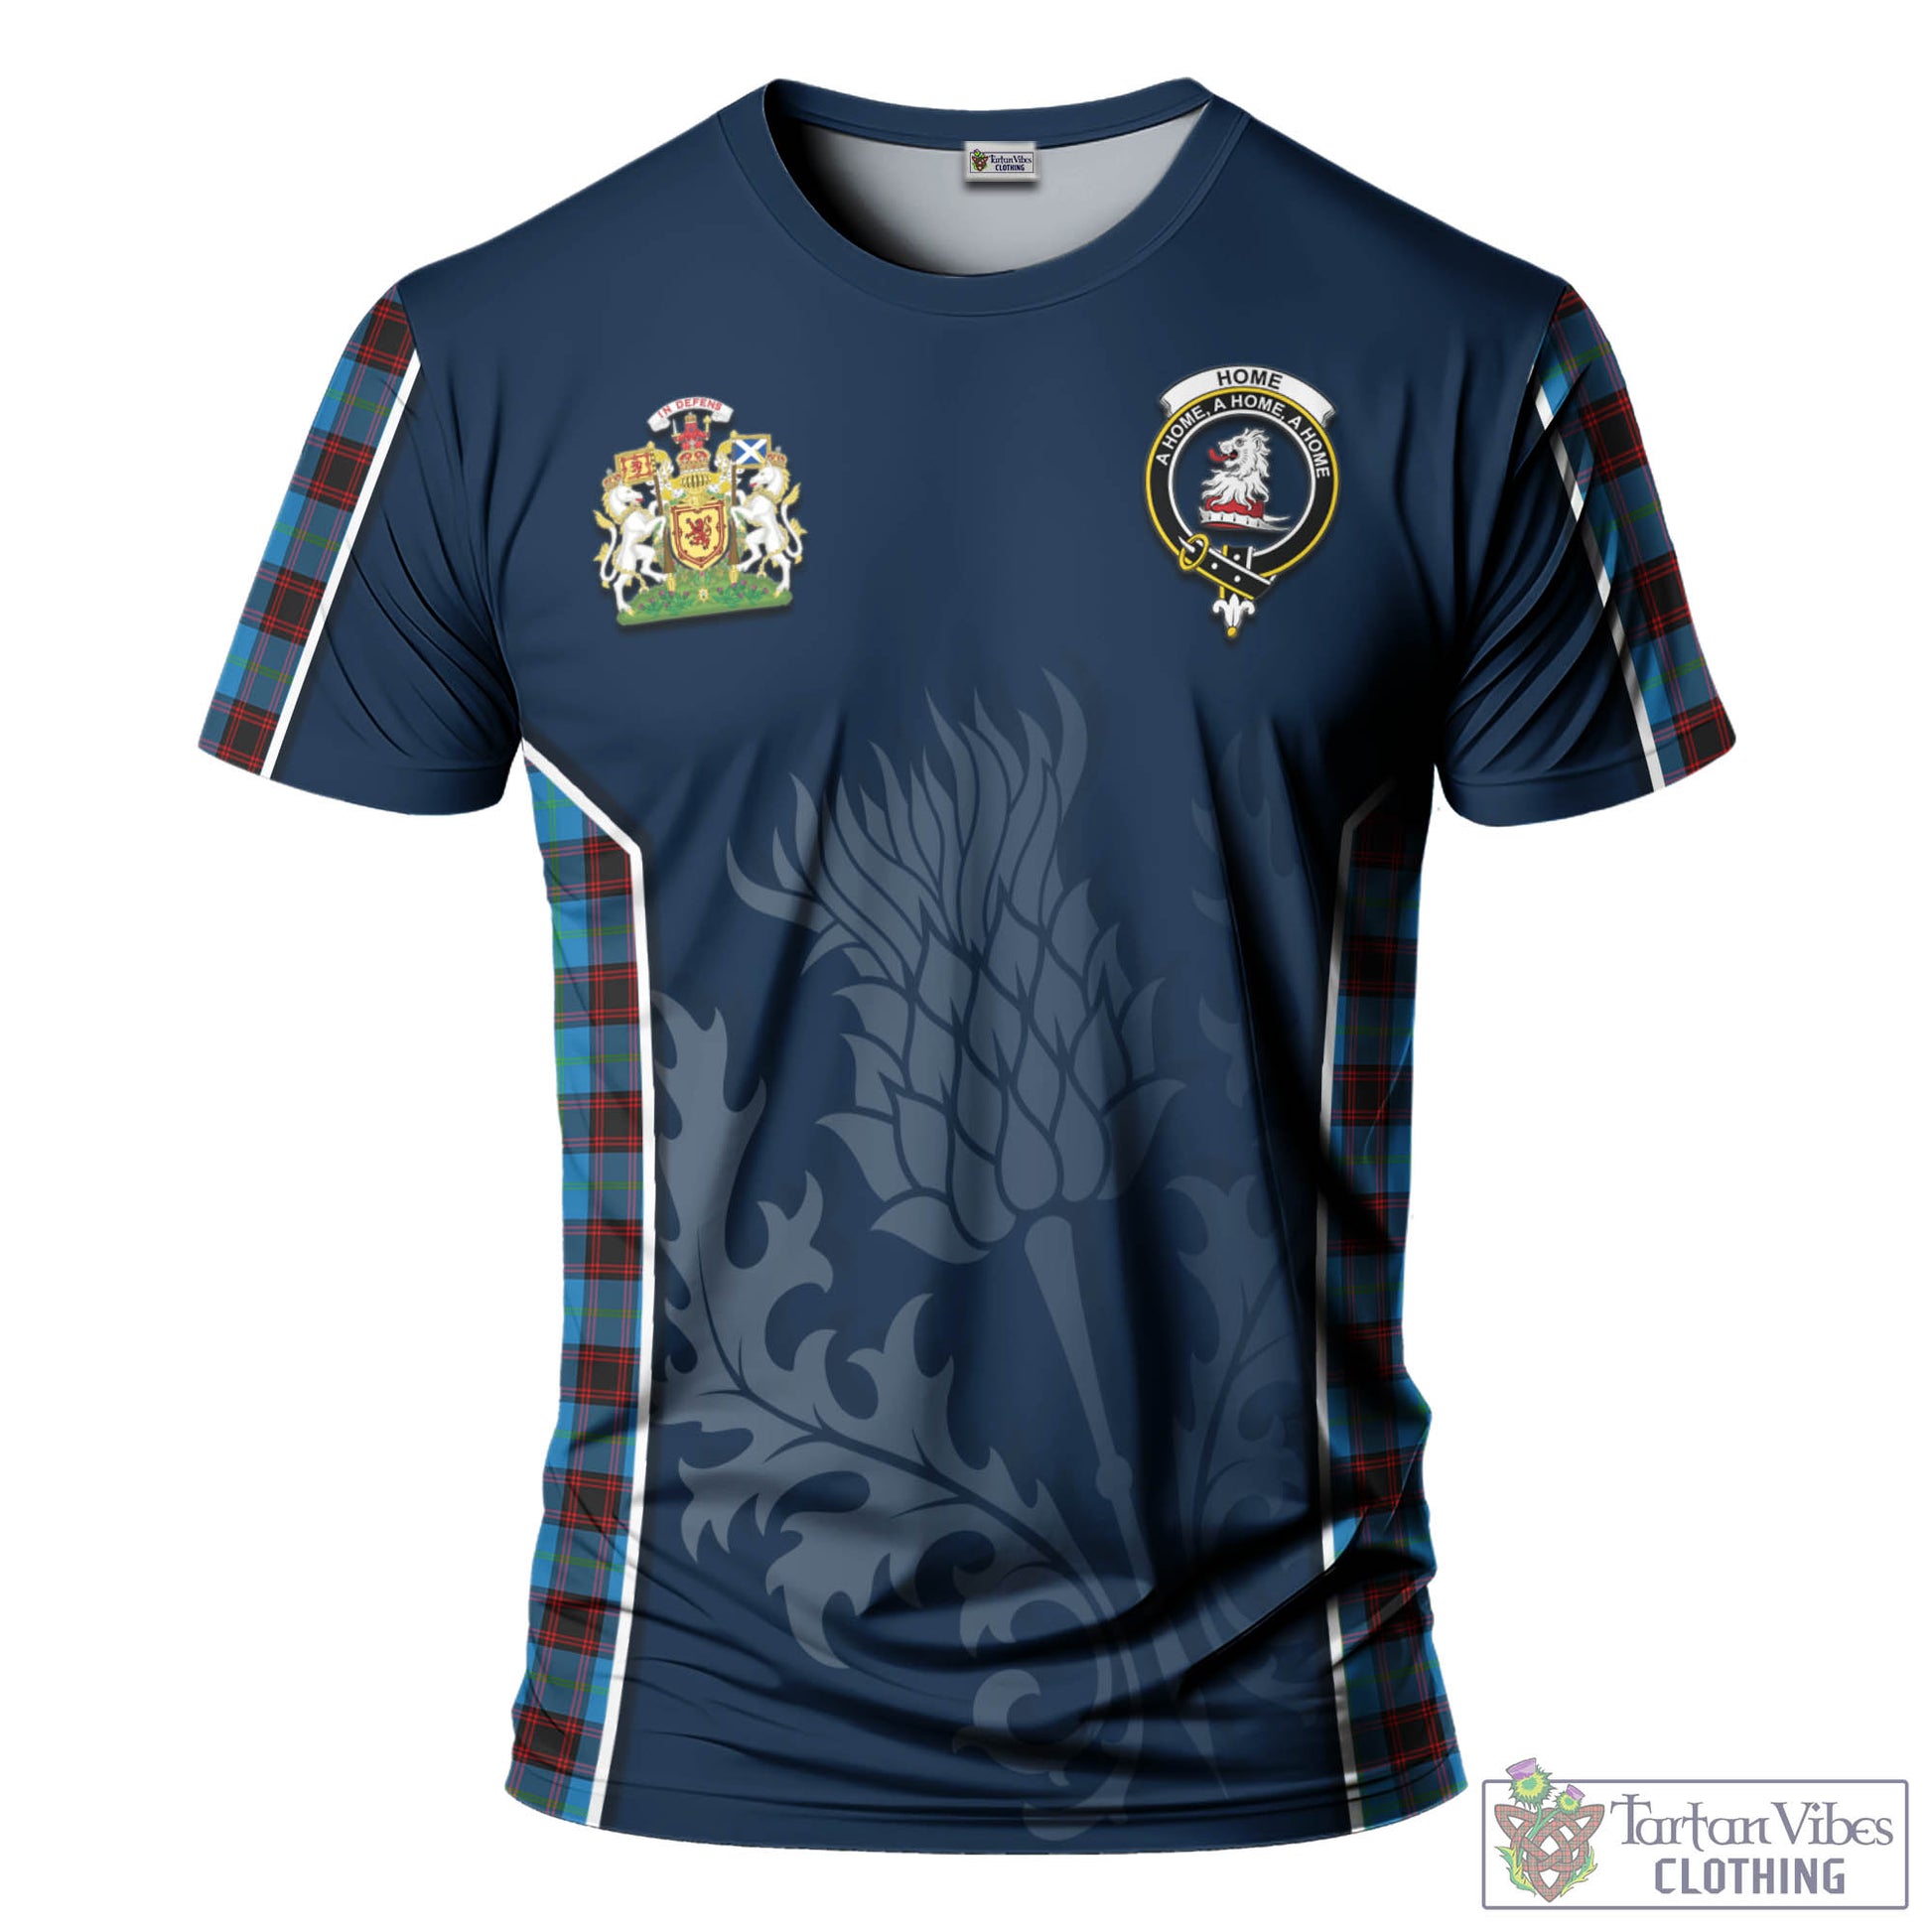 Tartan Vibes Clothing Home Ancient Tartan T-Shirt with Family Crest and Scottish Thistle Vibes Sport Style